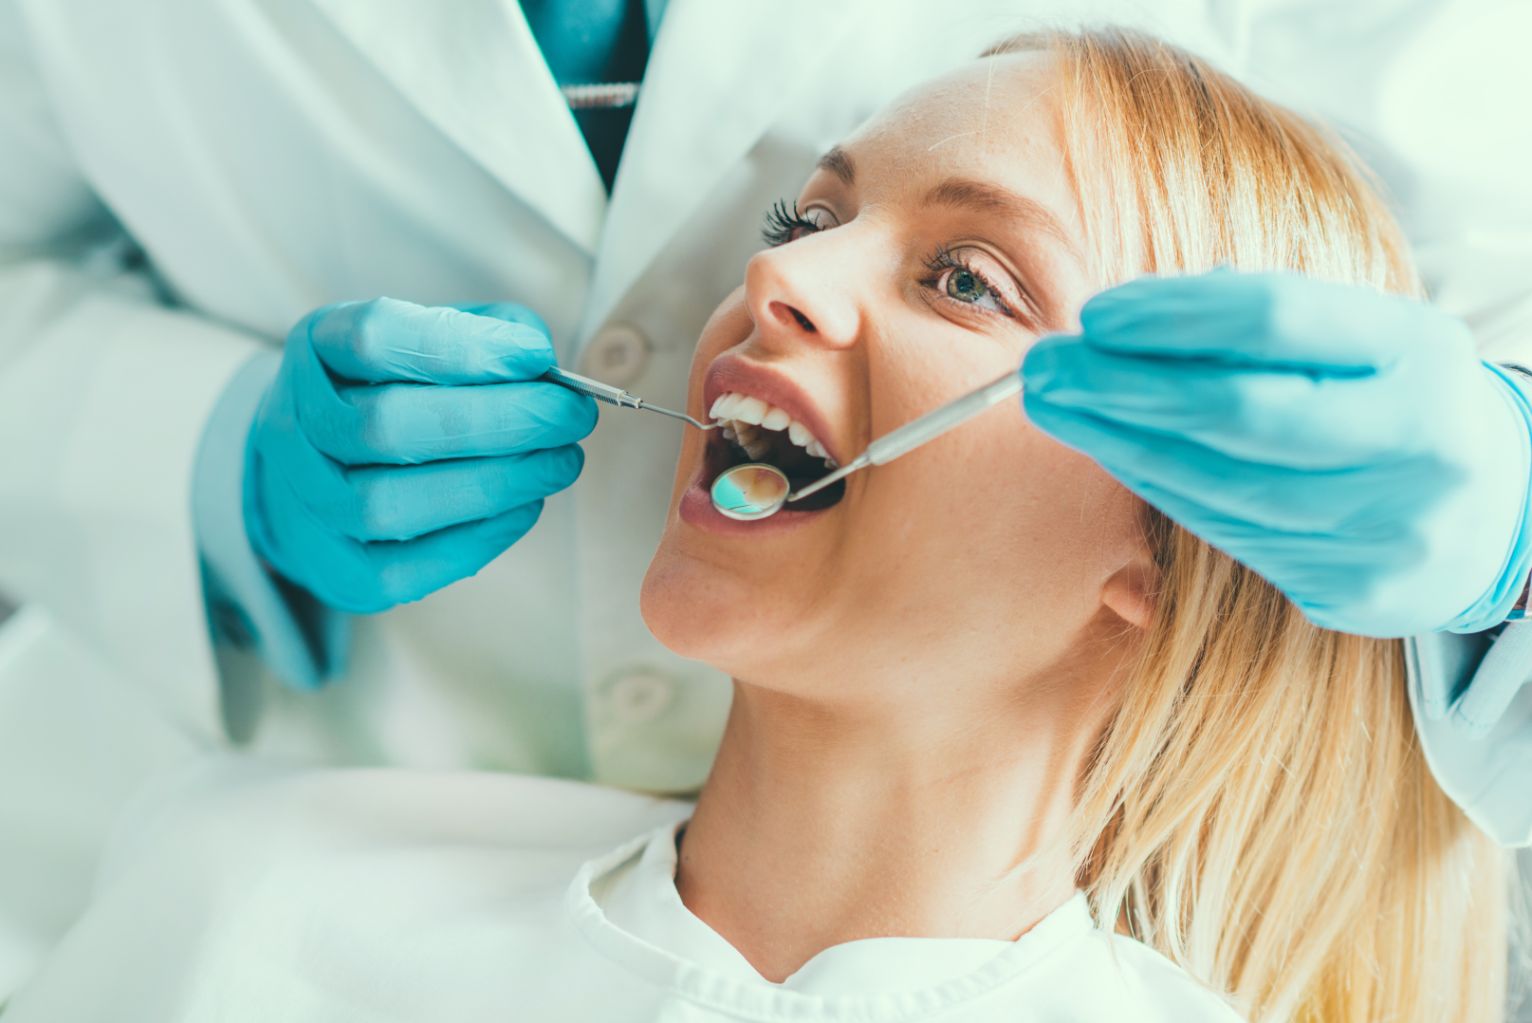 Rotting Teeth: How to Recognize and Treat Tooth Decay